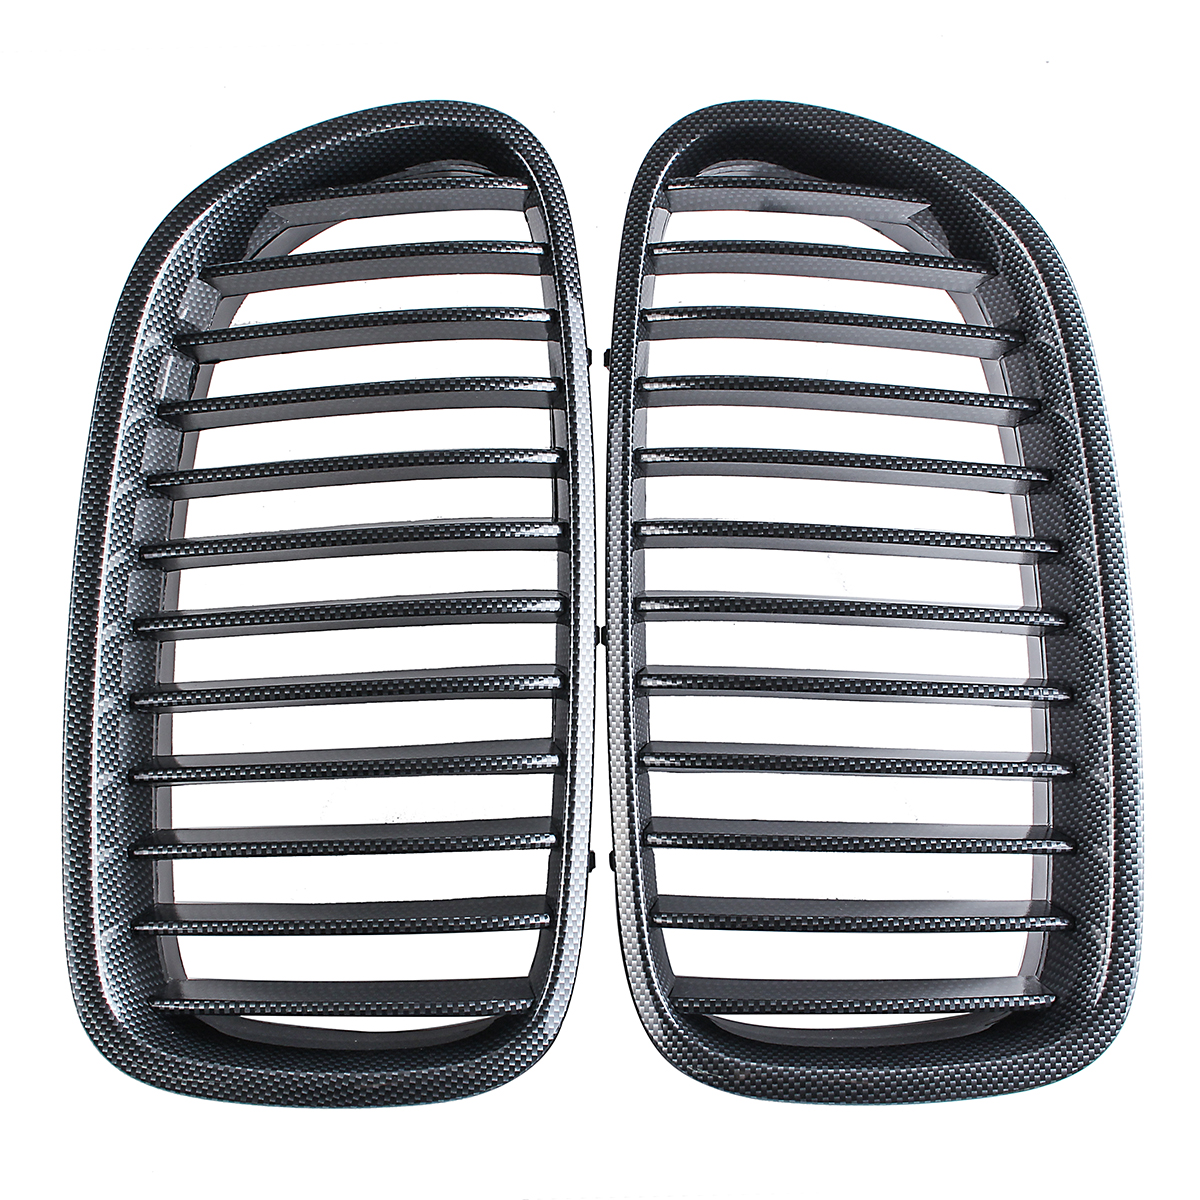 

Pair Carbon Fiber ABS Front Kidney Grille For BMW F18 F10 F11 5 Series 2010-2016